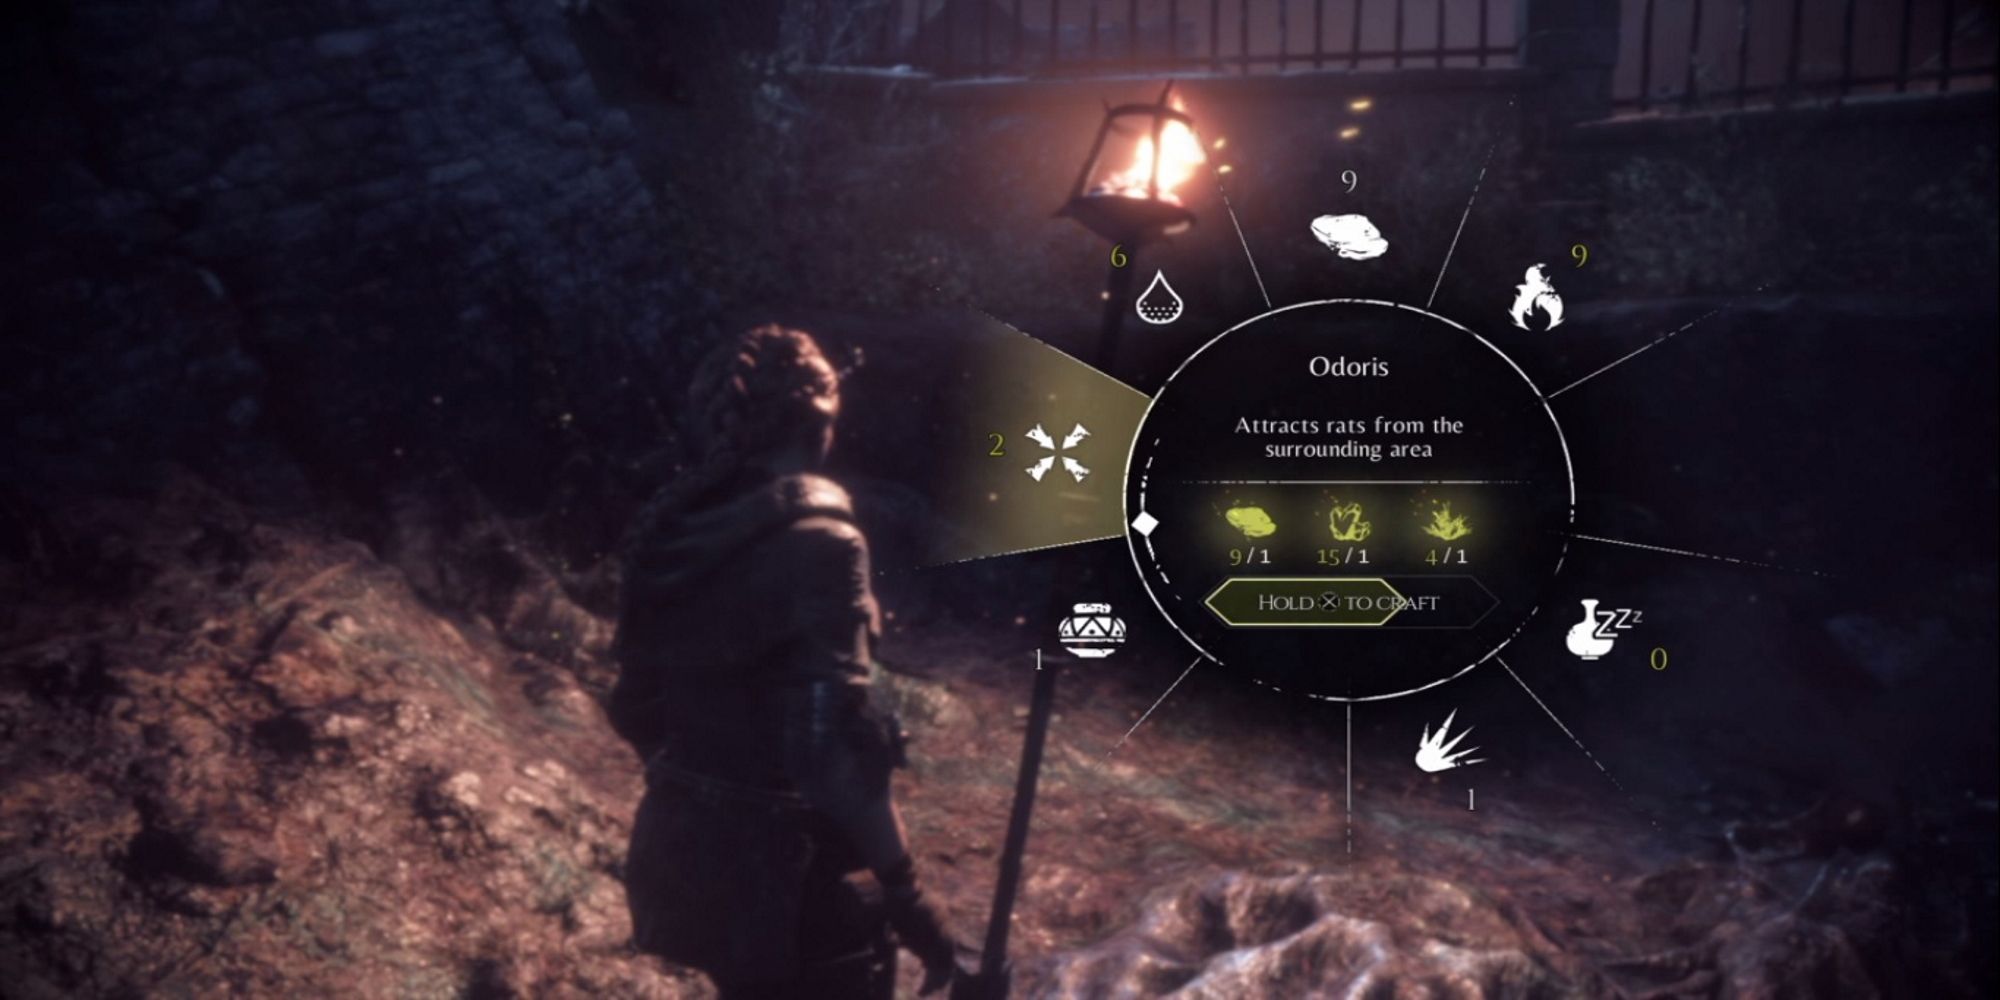  Odoris Sling Projectile from A Plague Tale Innocence